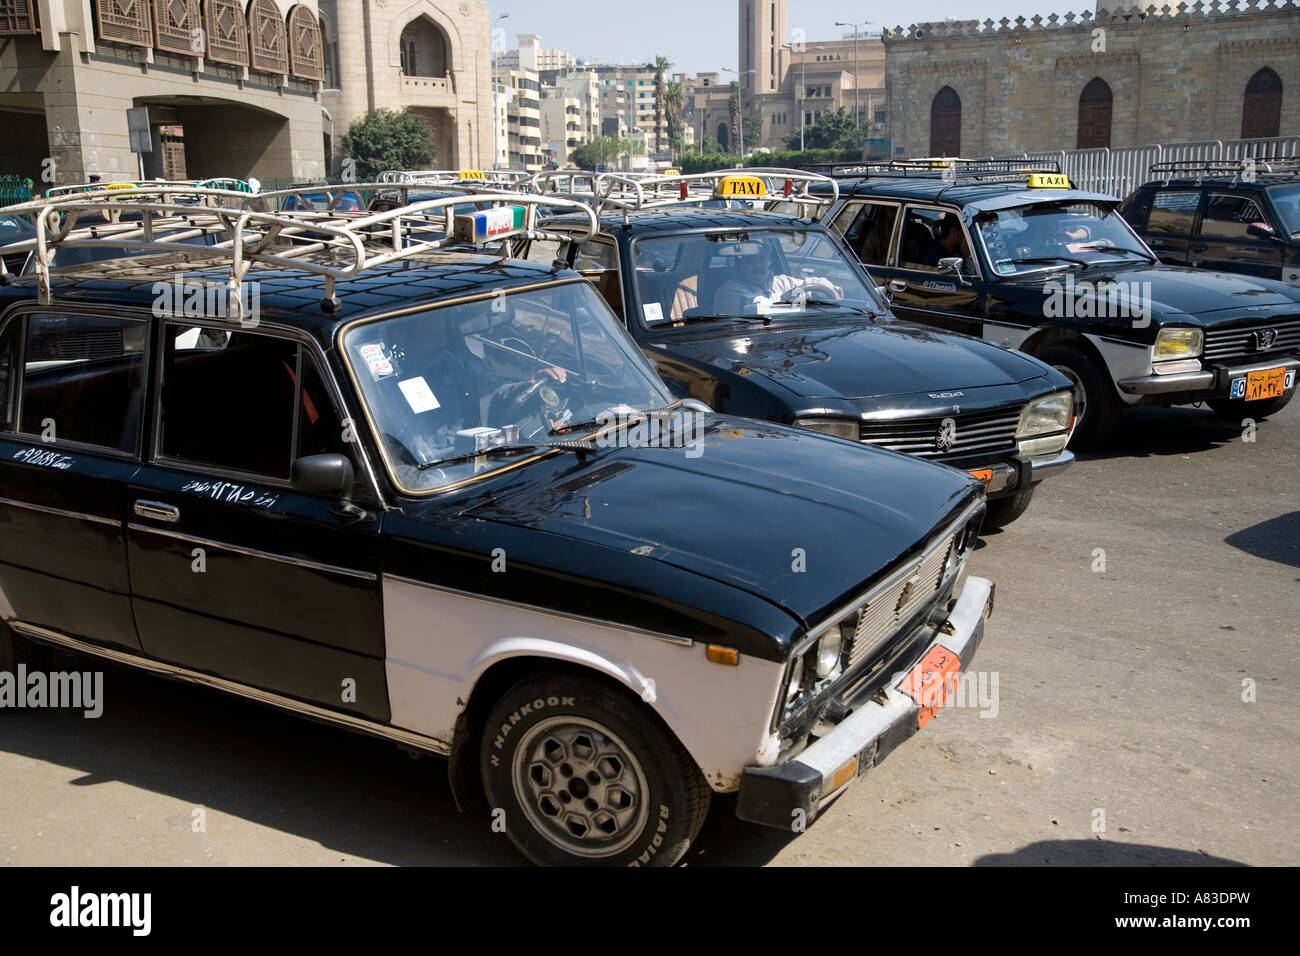 Taxis in Islamic Cairo, Egypt Stock Photo